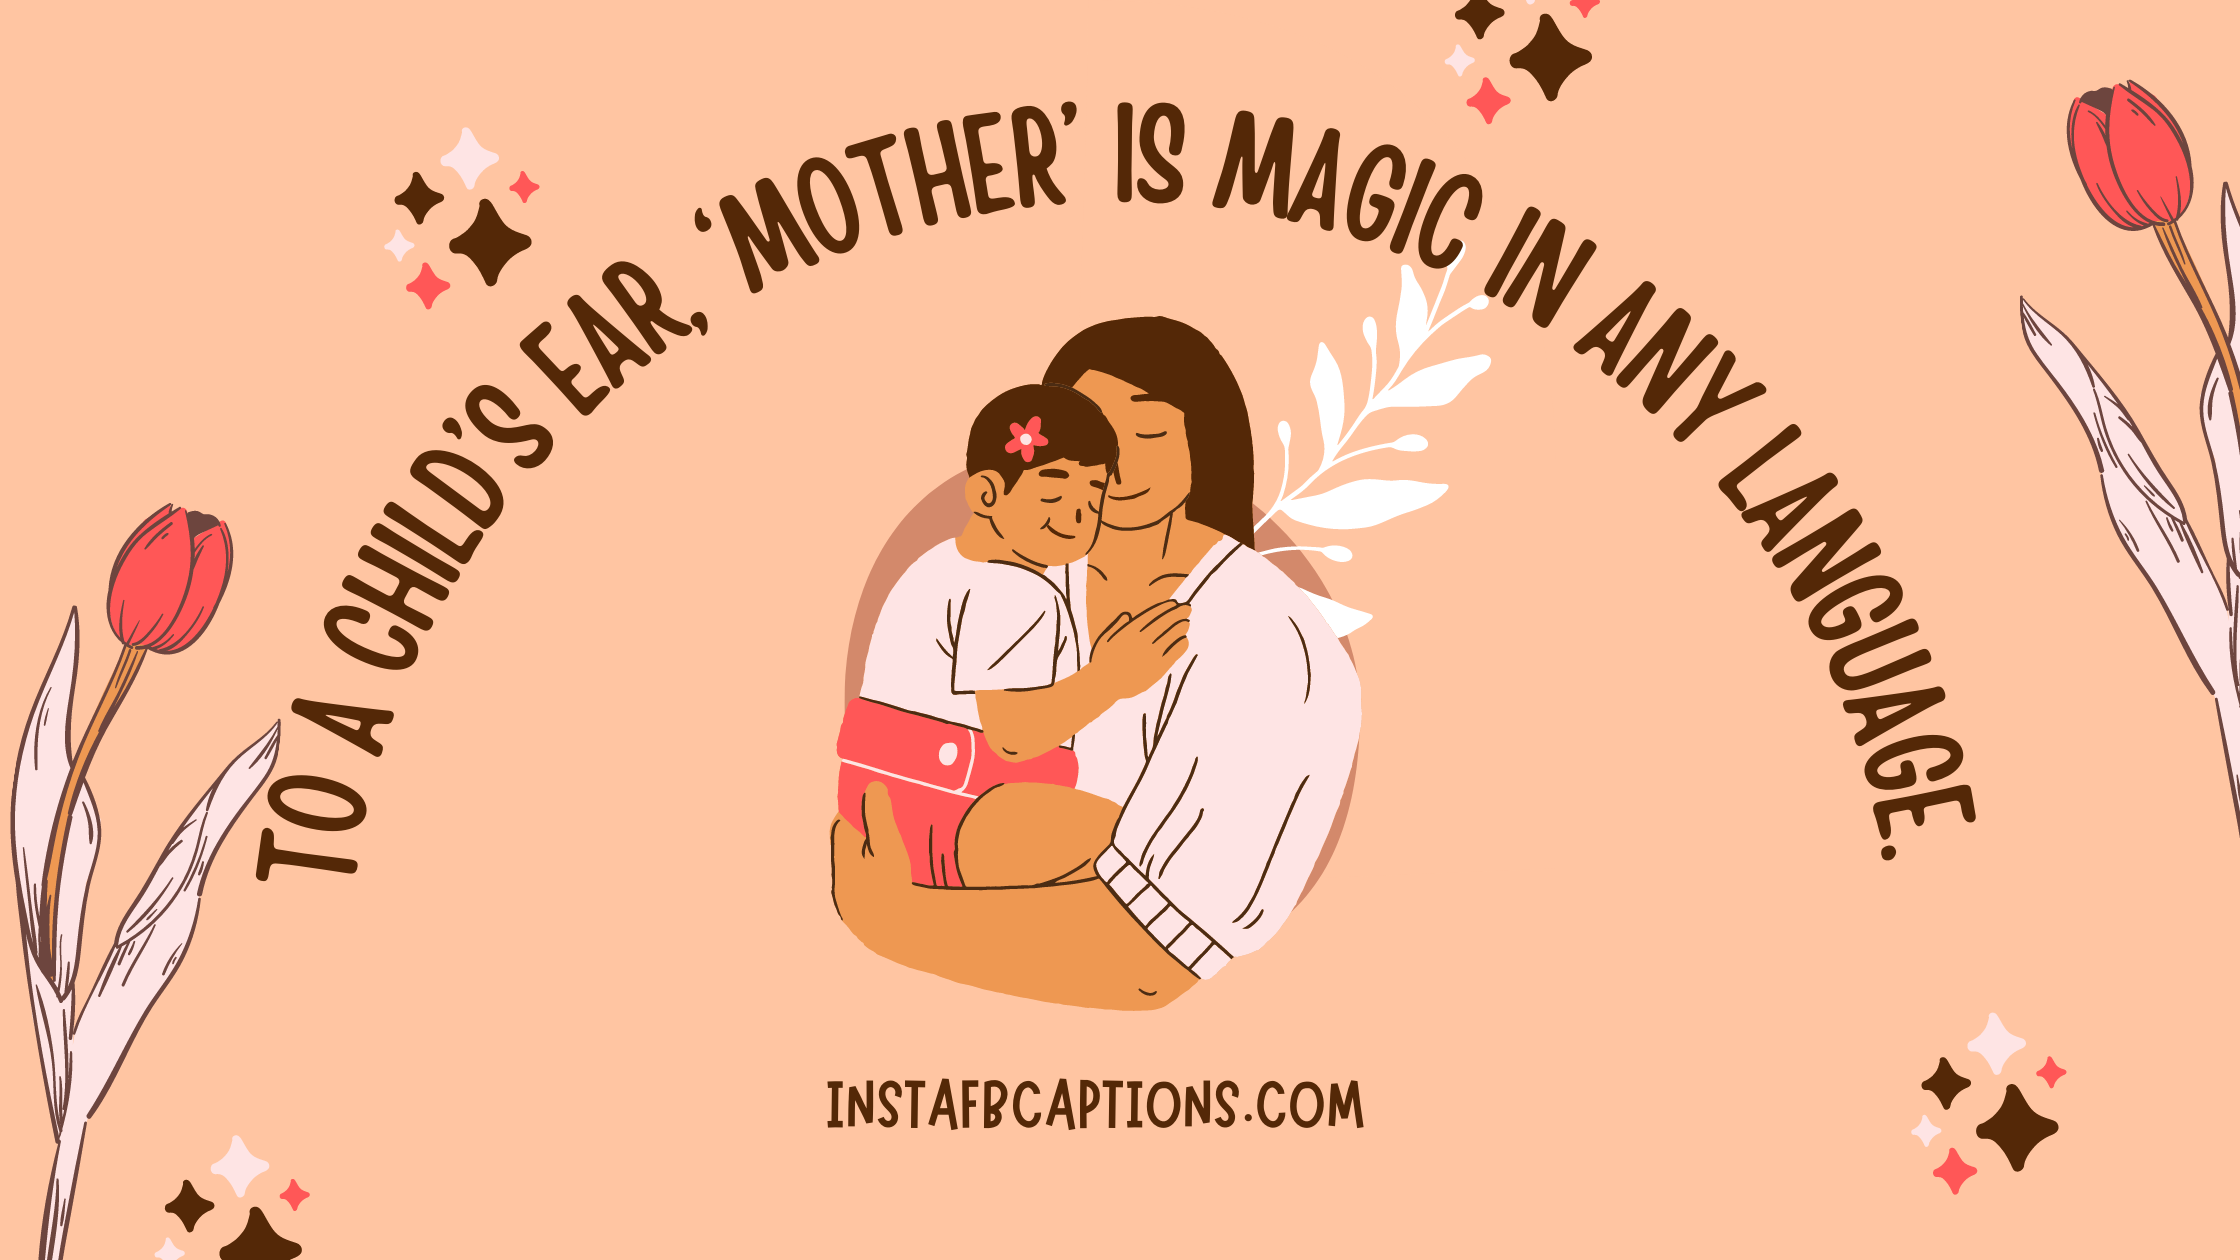 Inspiring Captions For Your Mother  - Inspiring Captions for your Mother - 150+ Mothers Day Captions for Instagram Post with Mom in 2022